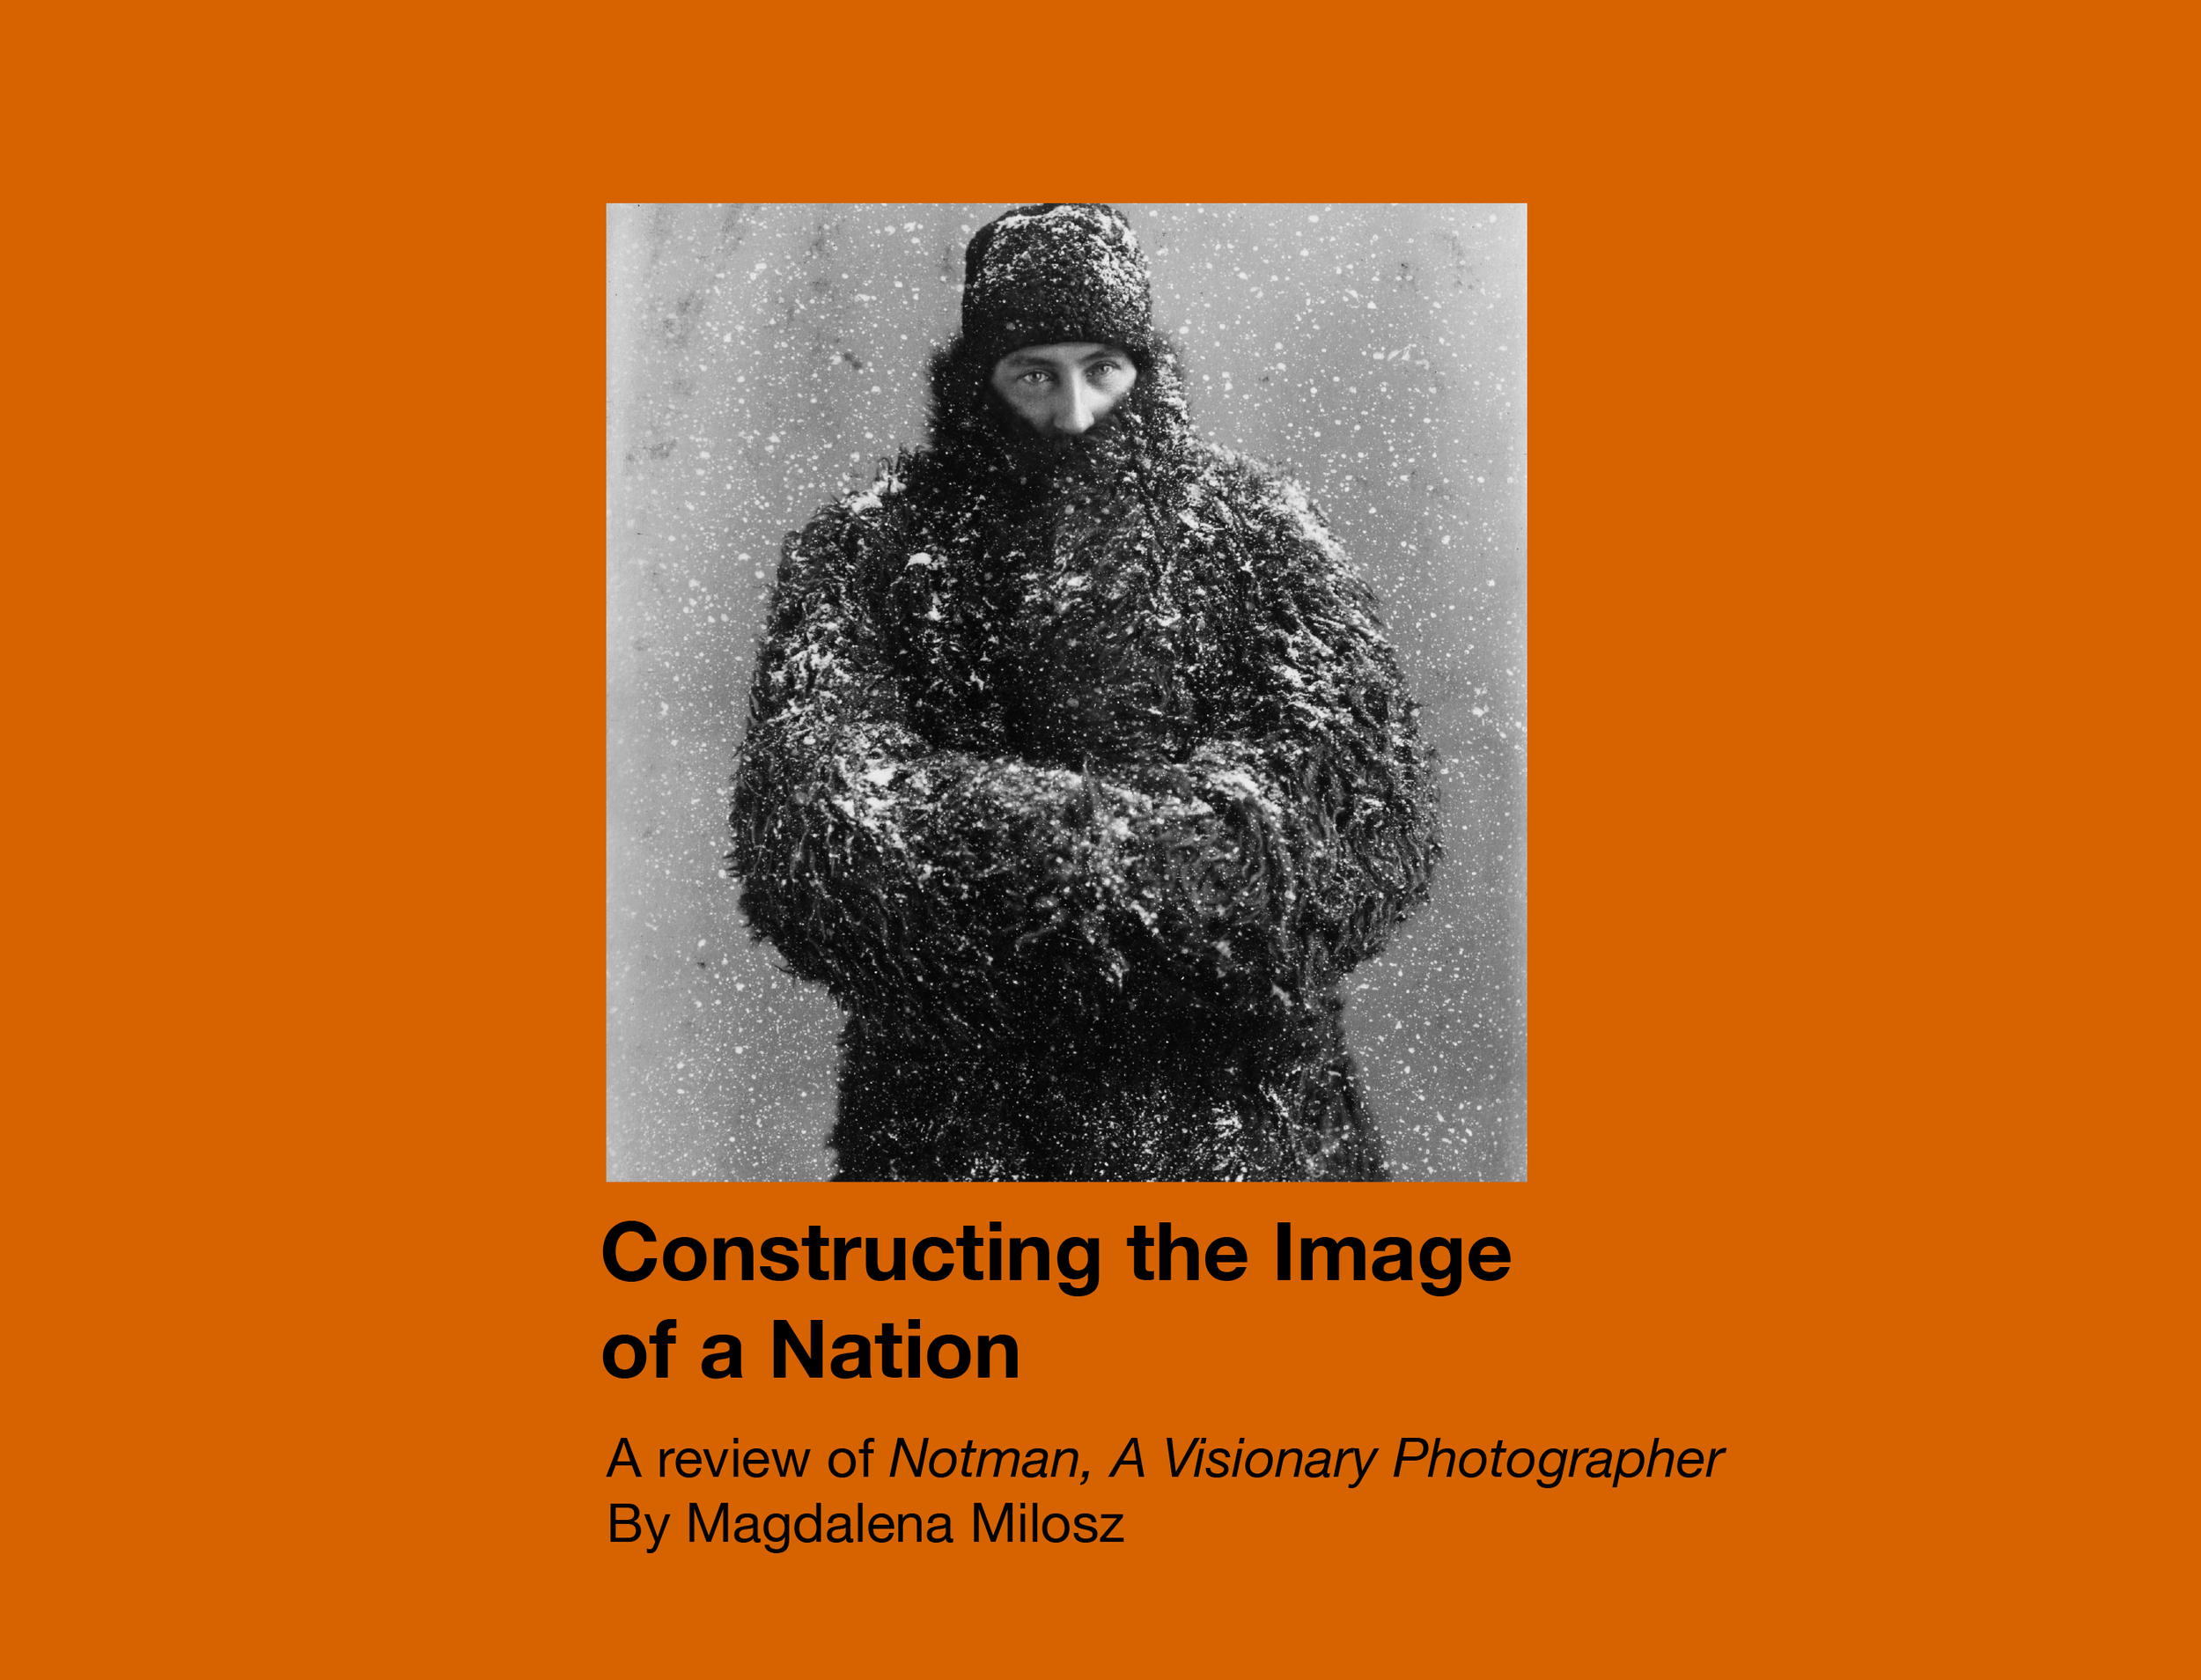 Constructing the Image of a Nation